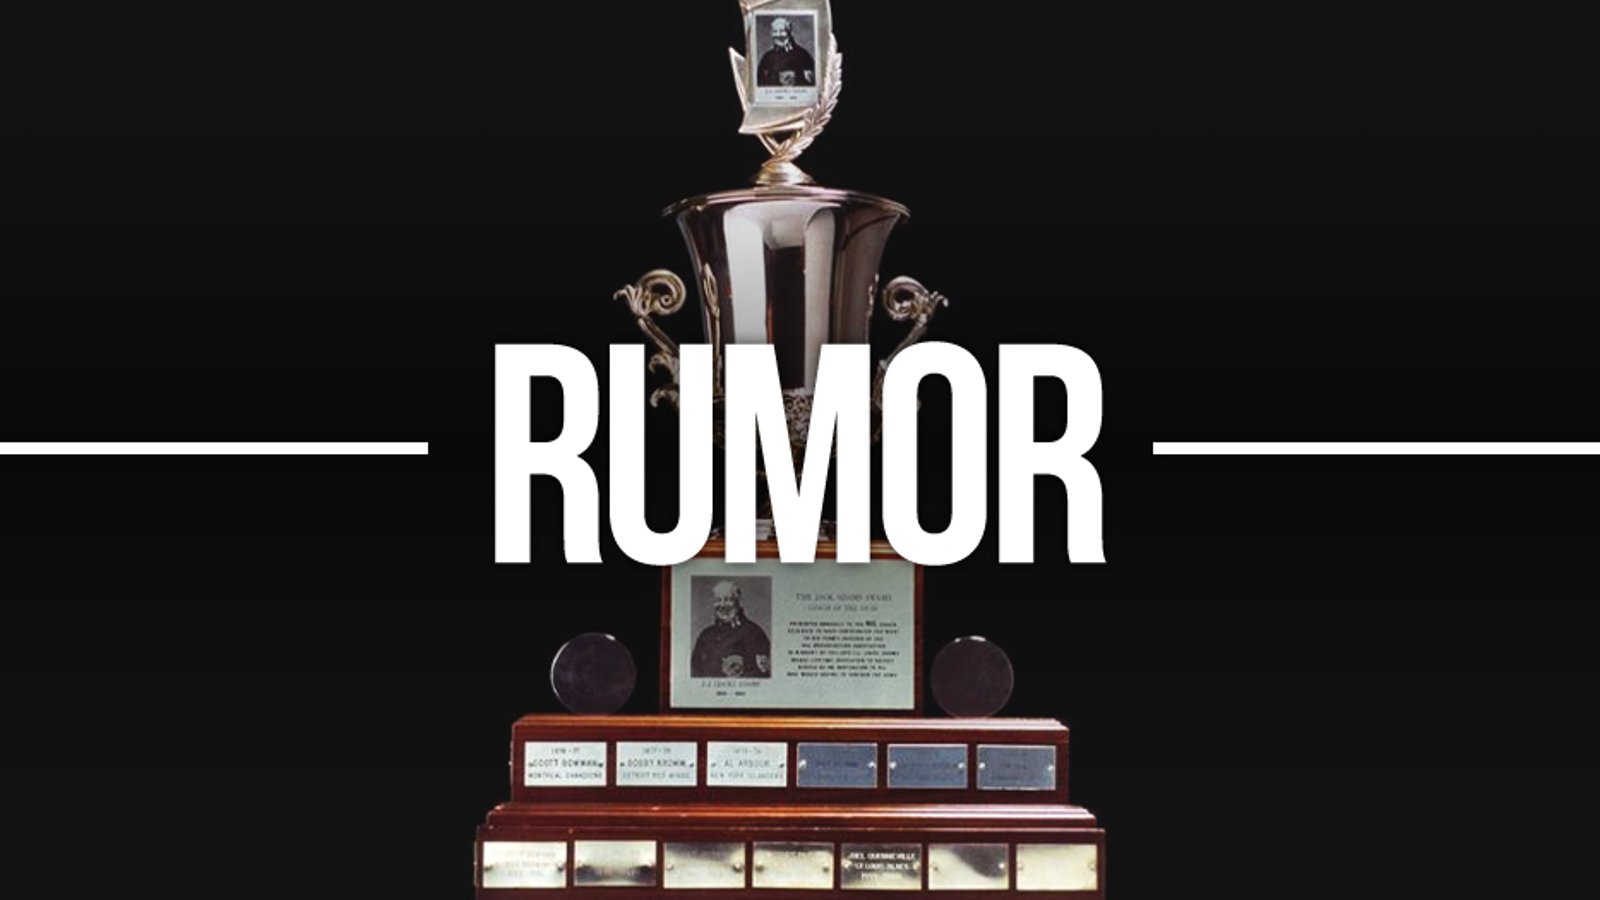 Rumor: Head Coach &amp; former Jack Adams winner about to get fired?